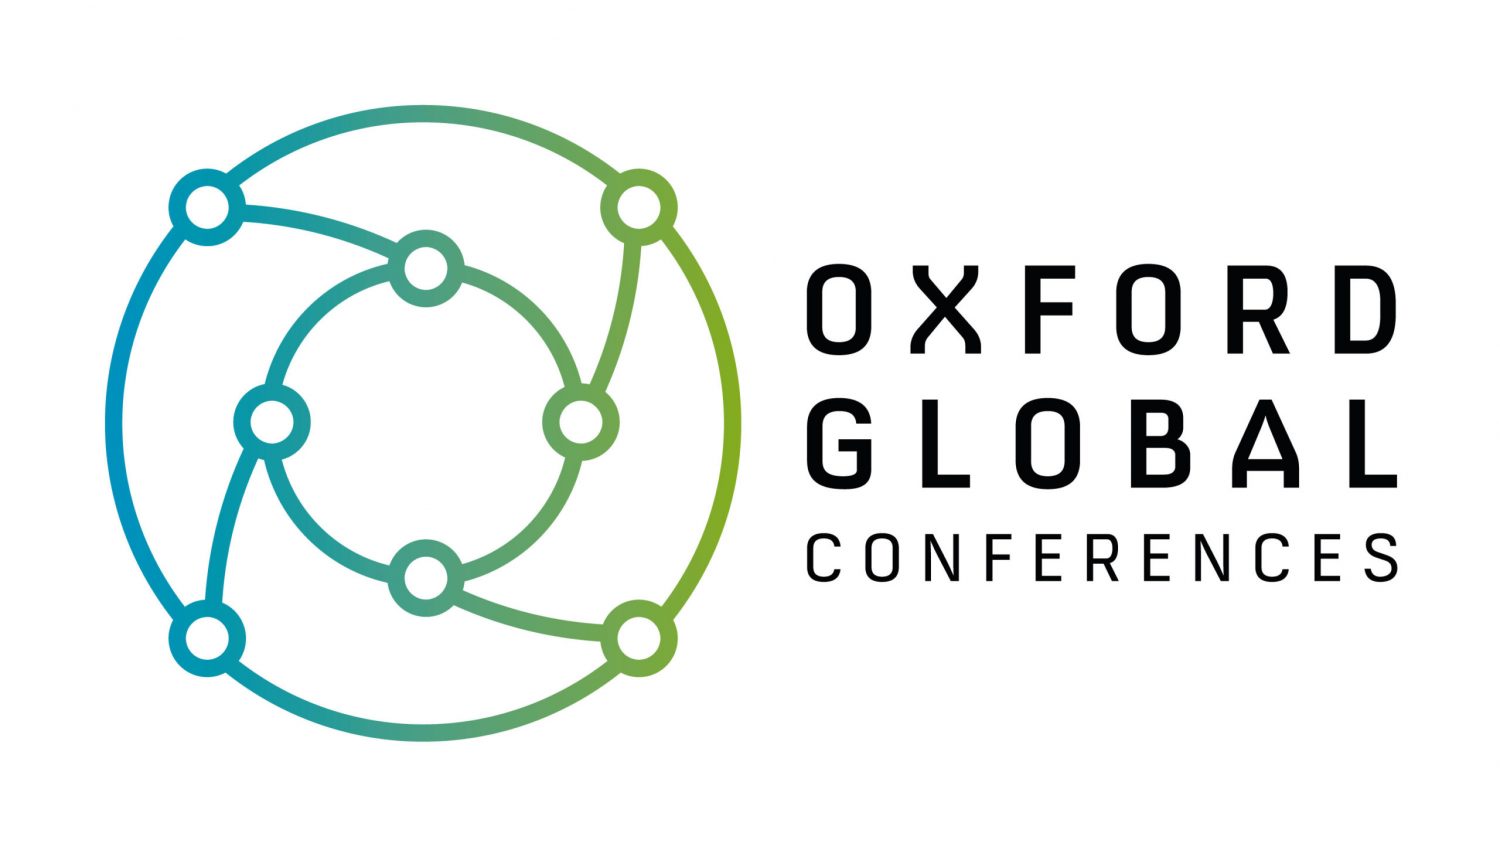 Oxford Global Conferences